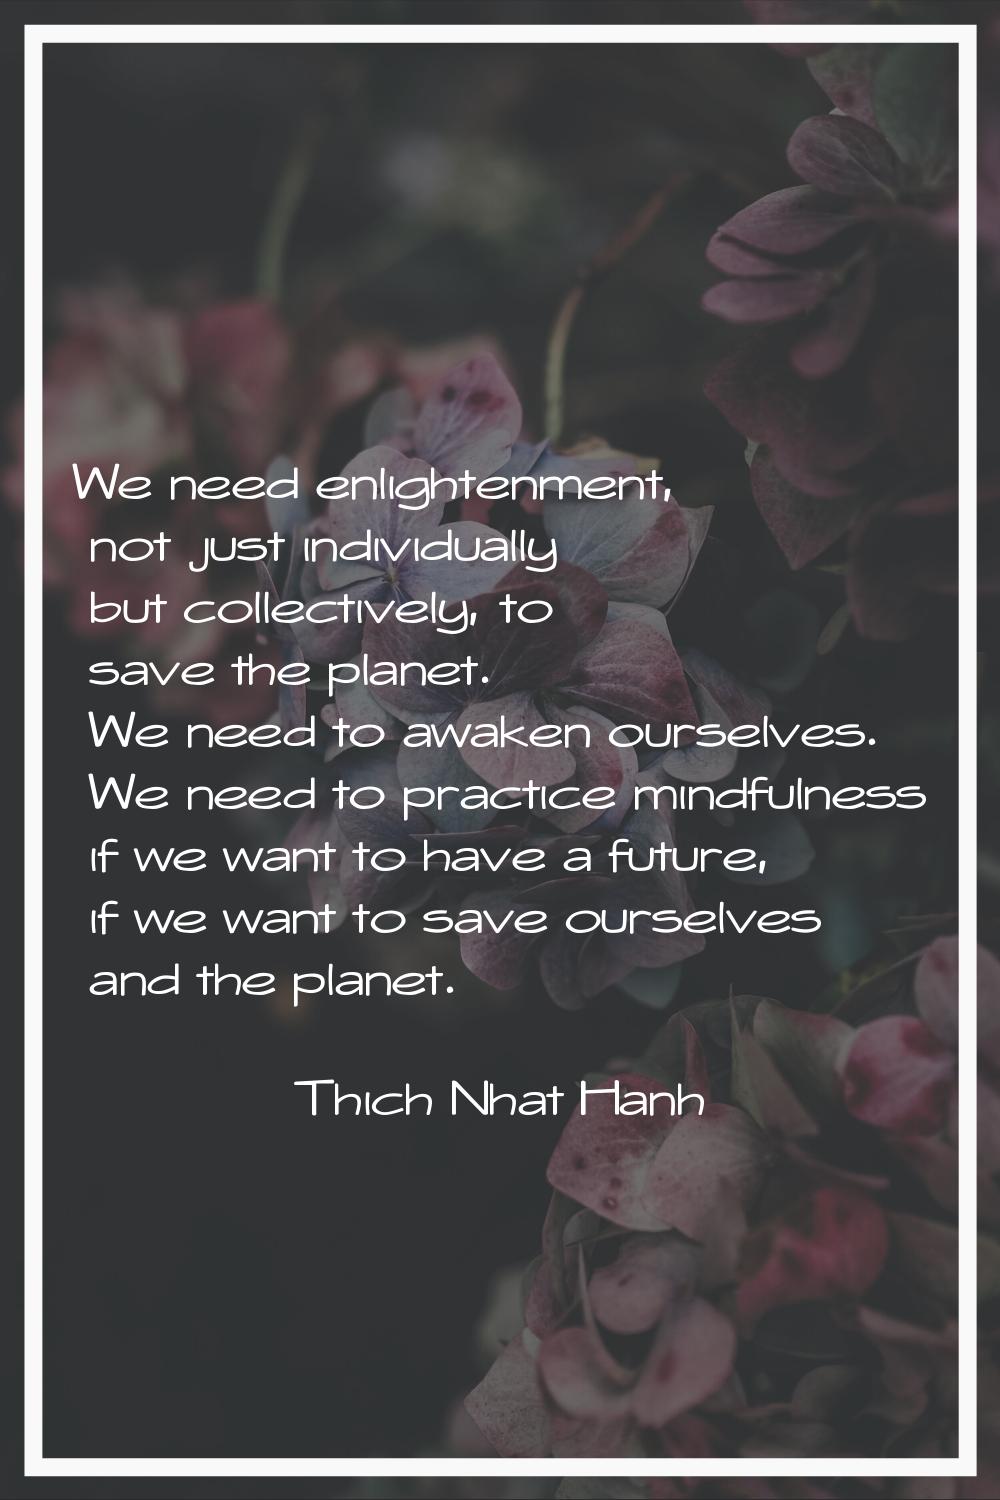 We need enlightenment, not just individually but collectively, to save the planet. We need to awake